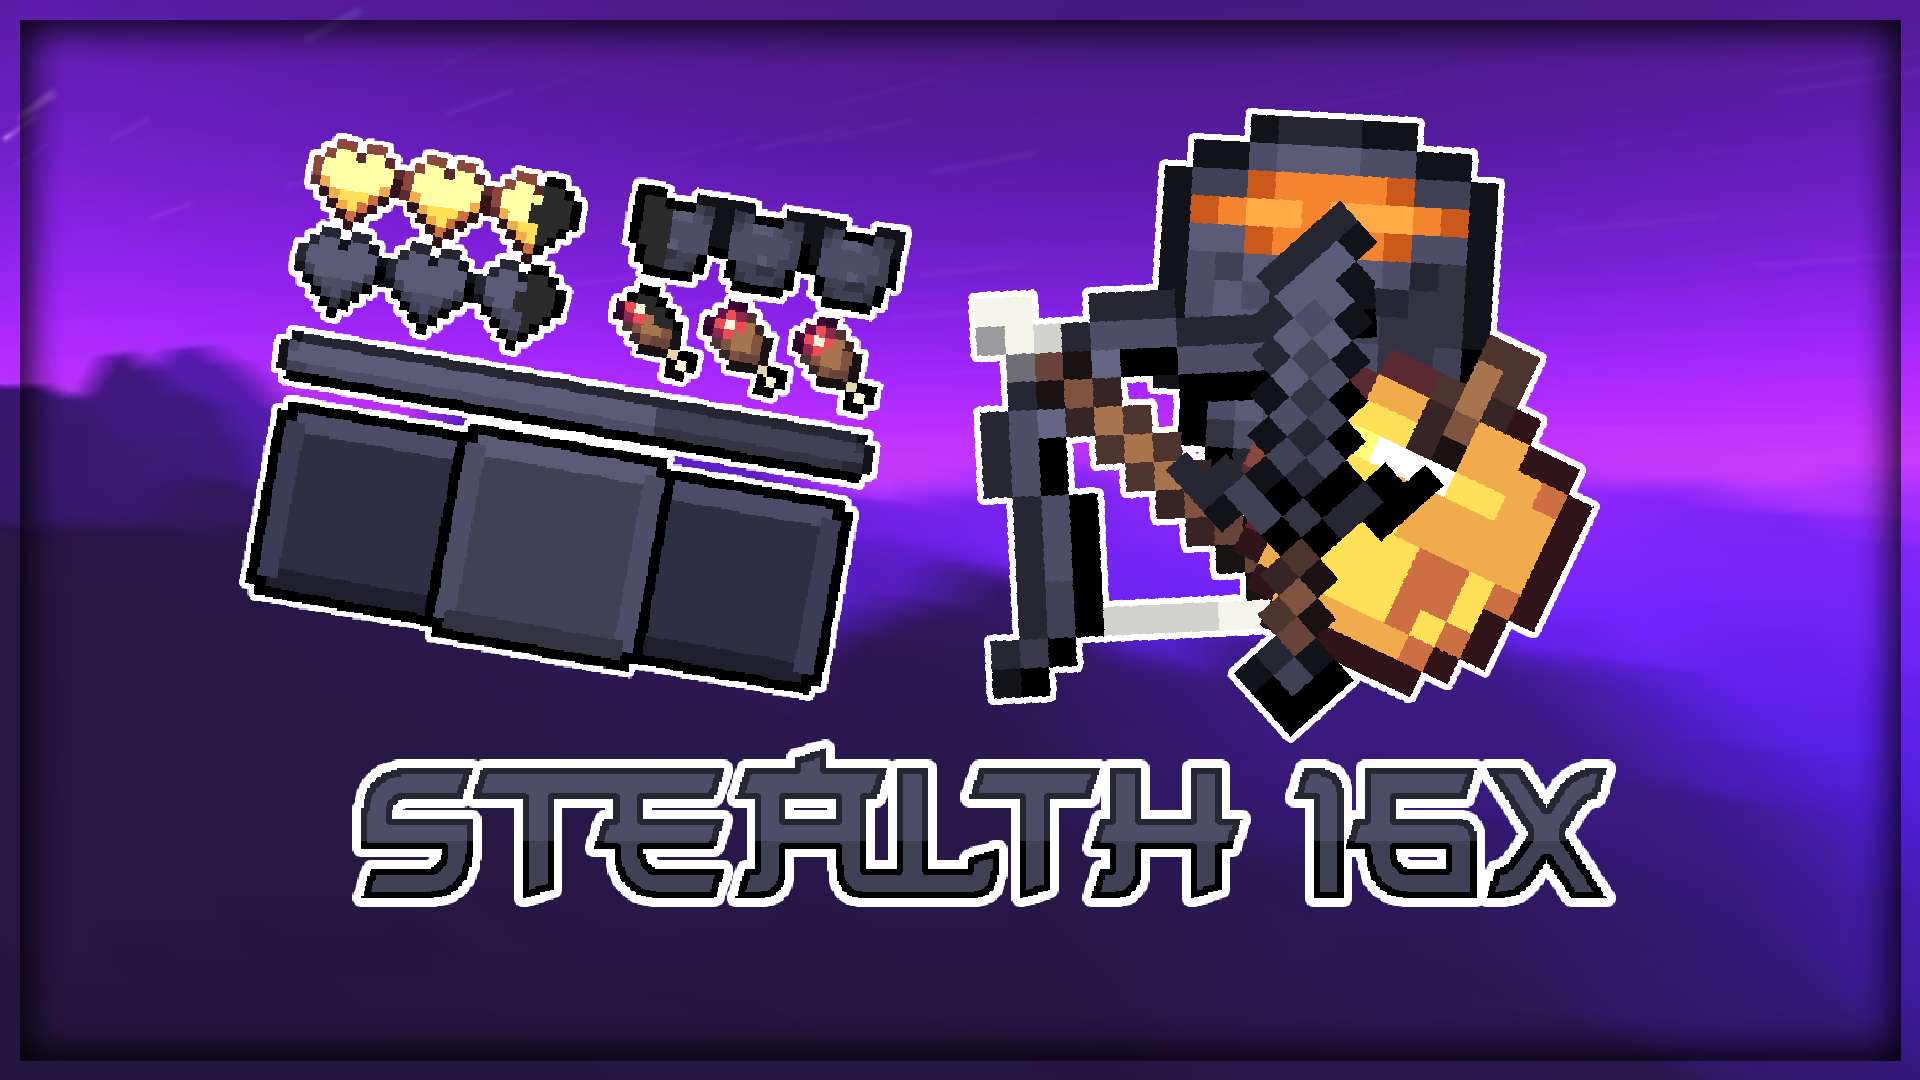 Gallery Banner for Stealth on PvPRP